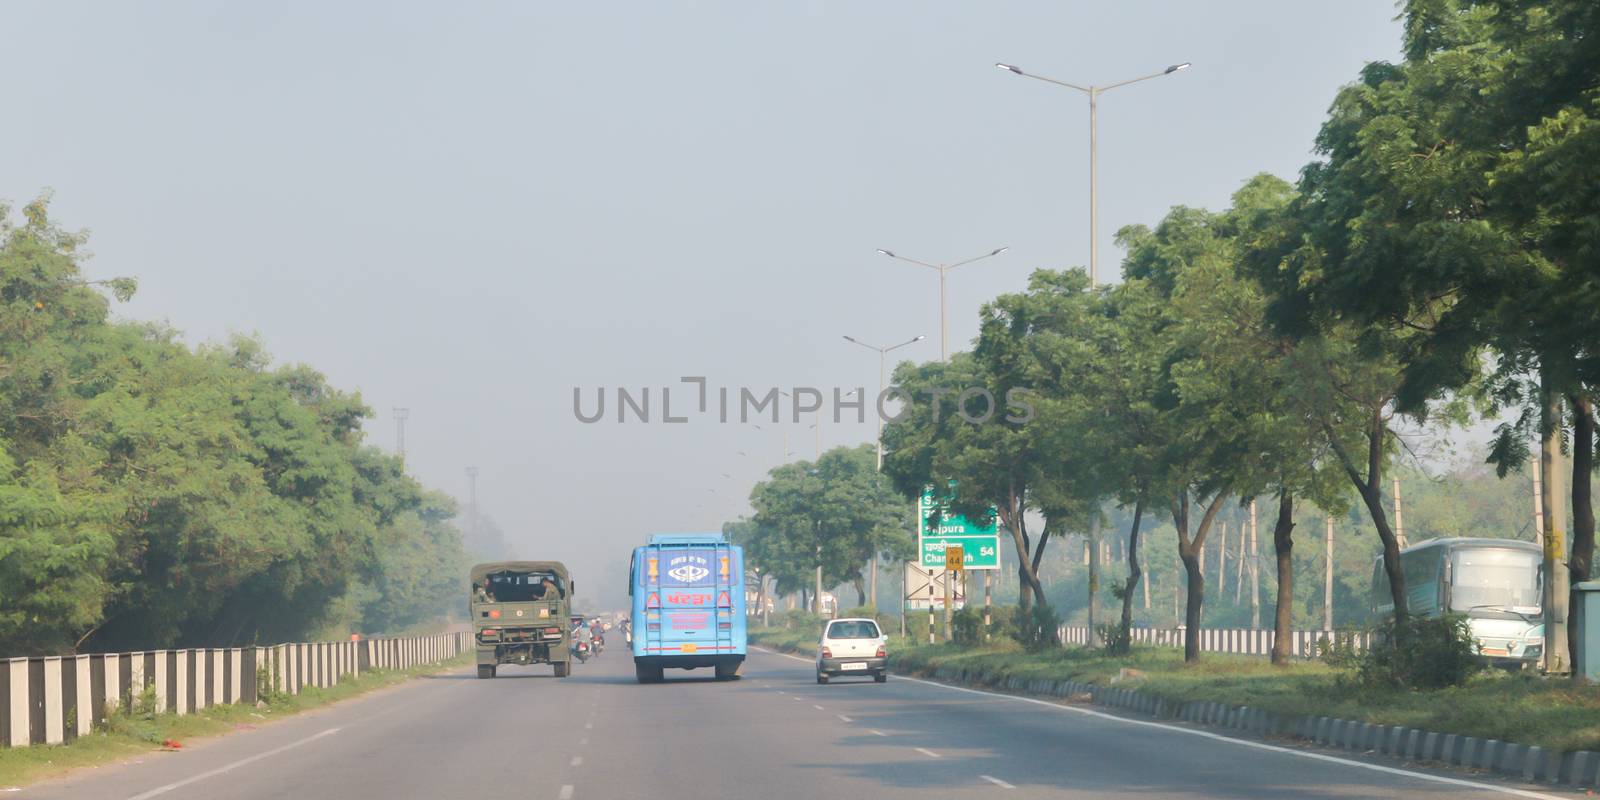 Chandigarh, Punjab, India, South Asia November 2019 - Landscape view of City Street of Chandigarh, the cleanest city of India.